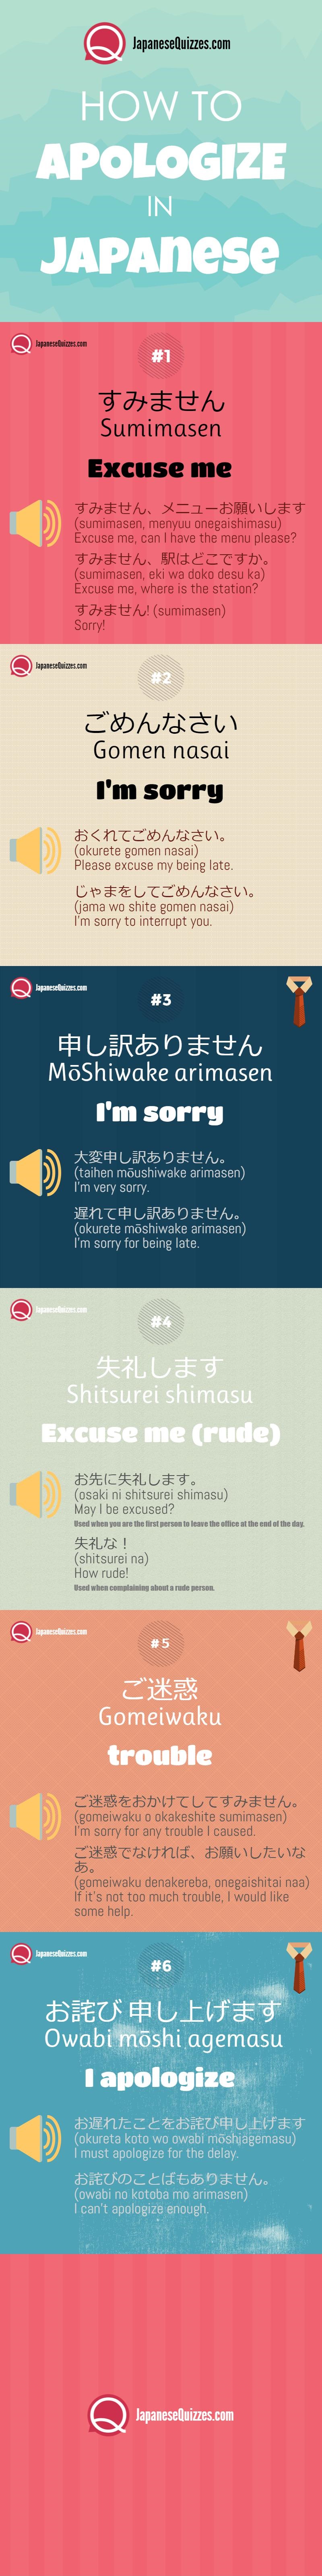 How to Apologise in Japanese